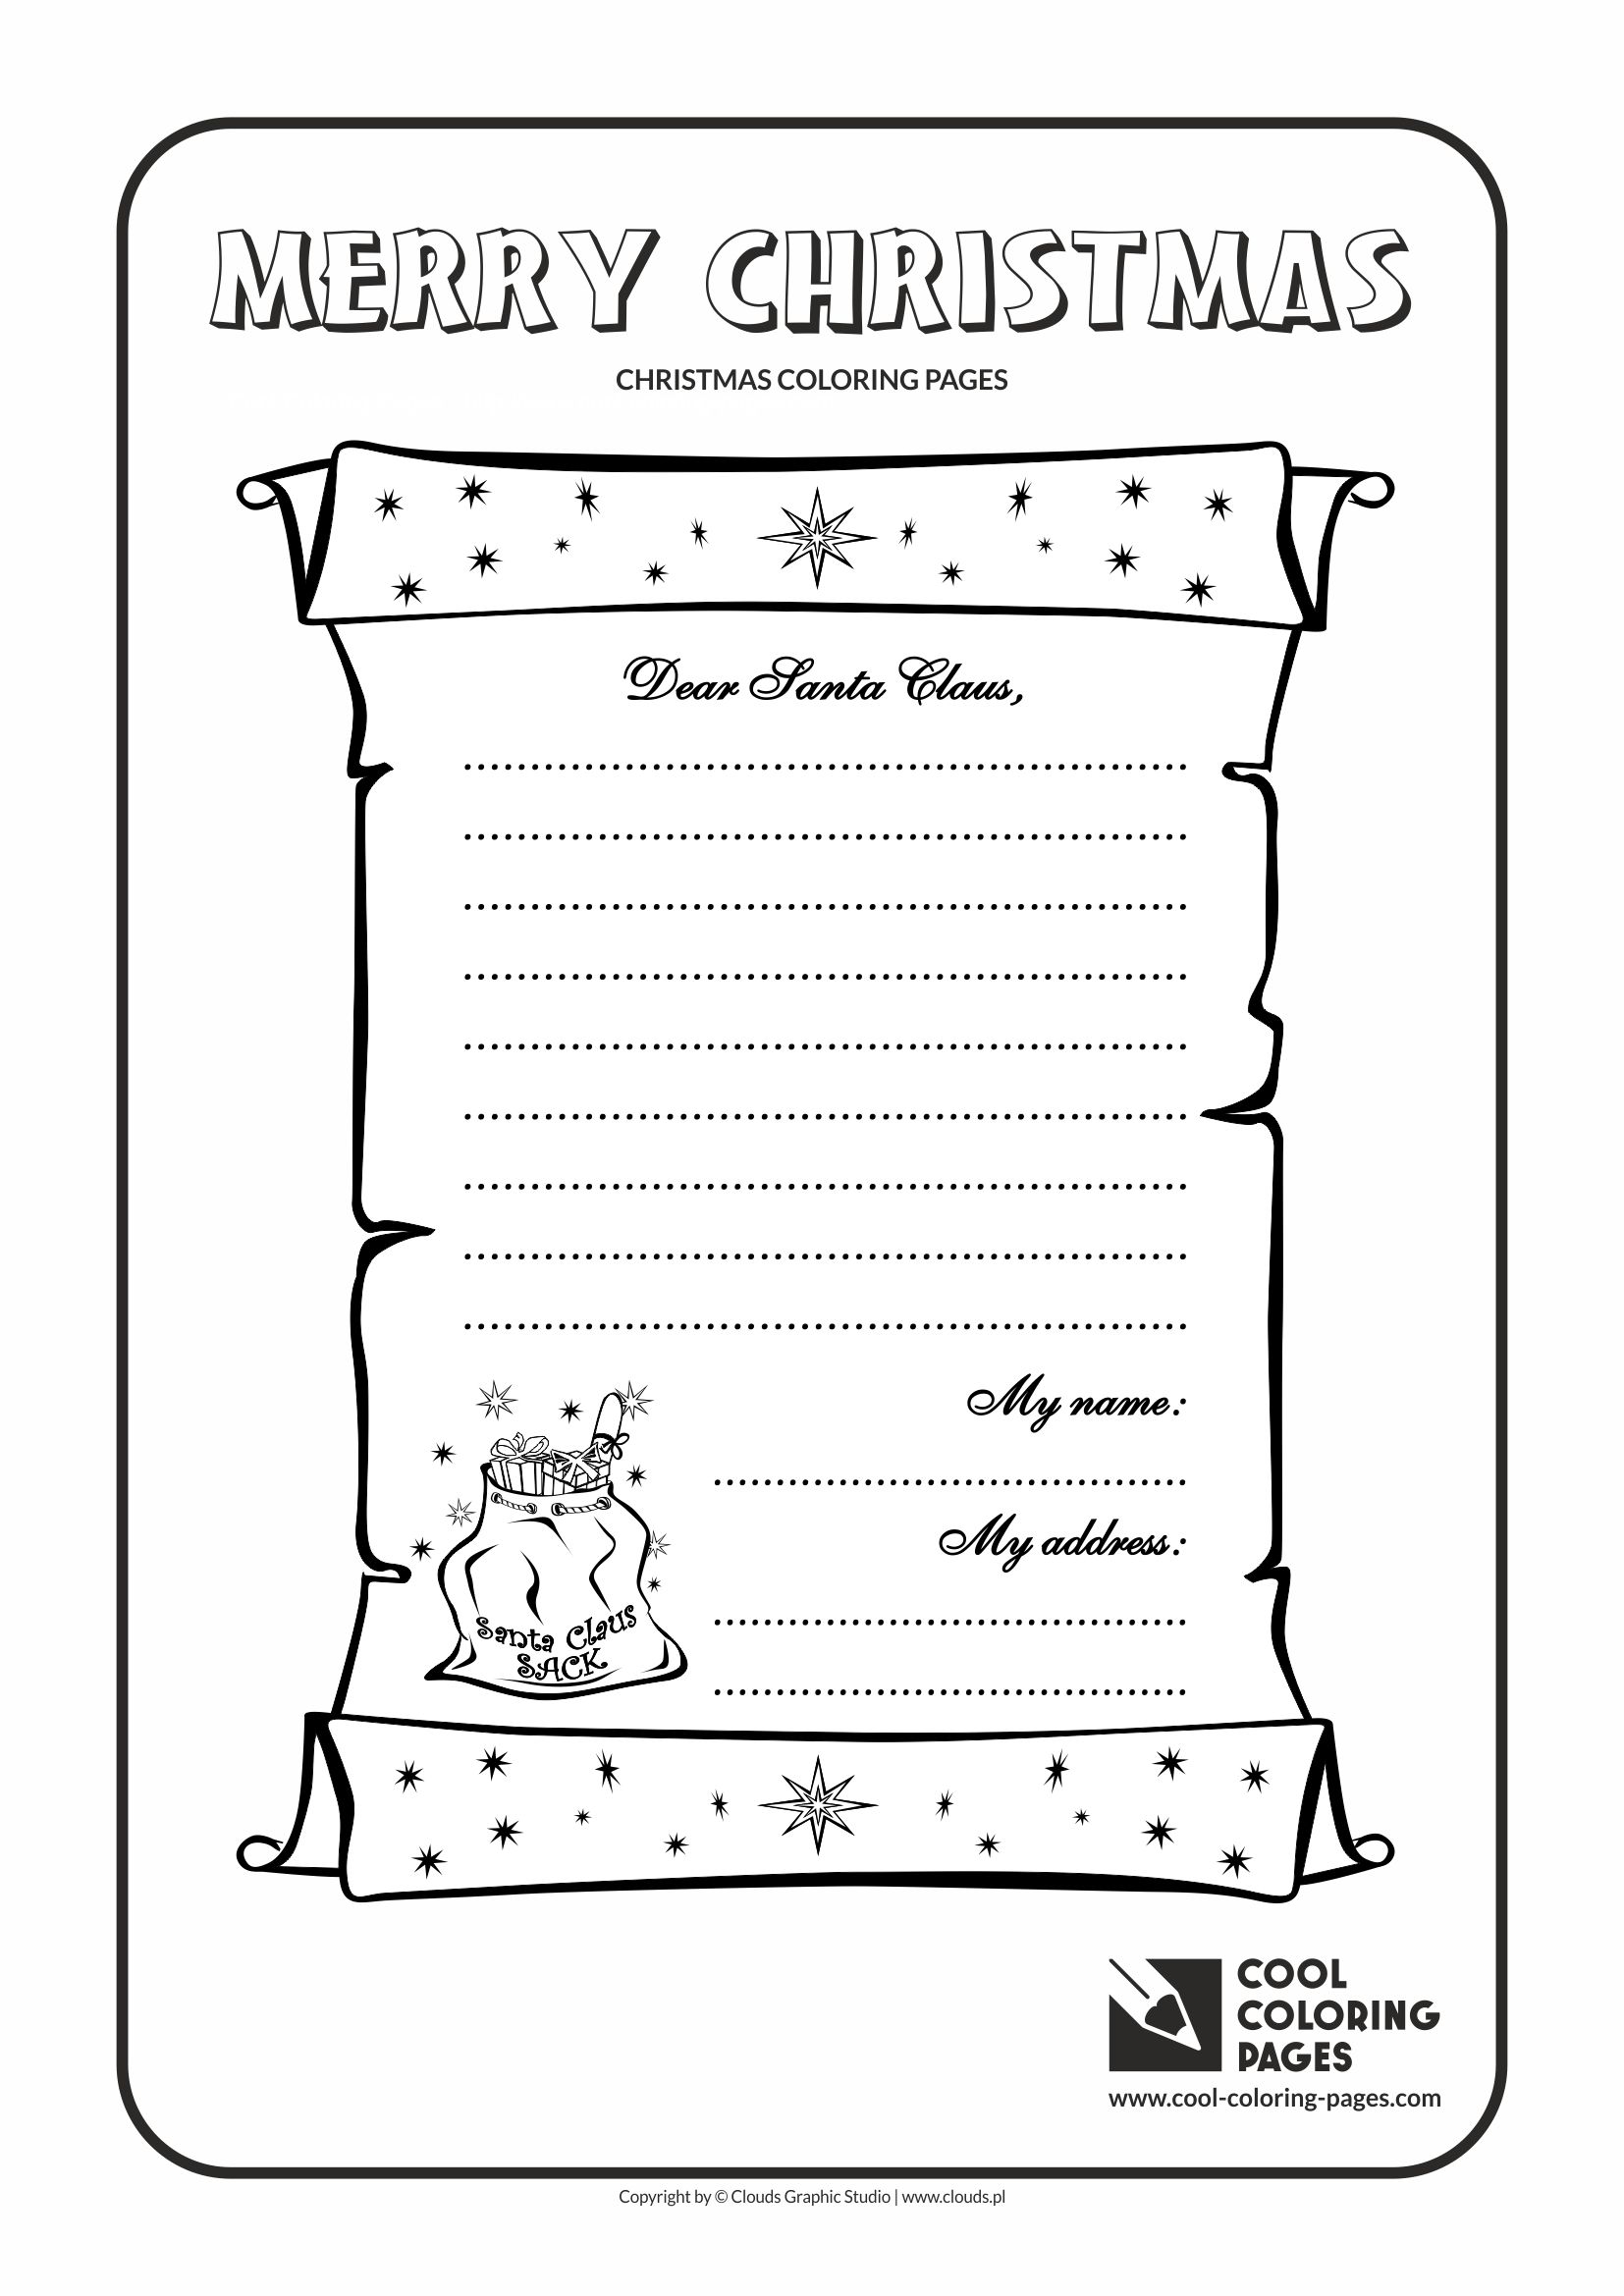 Letter Santa Claus 1 Coloring Page Cool Pages Holidays Christmas